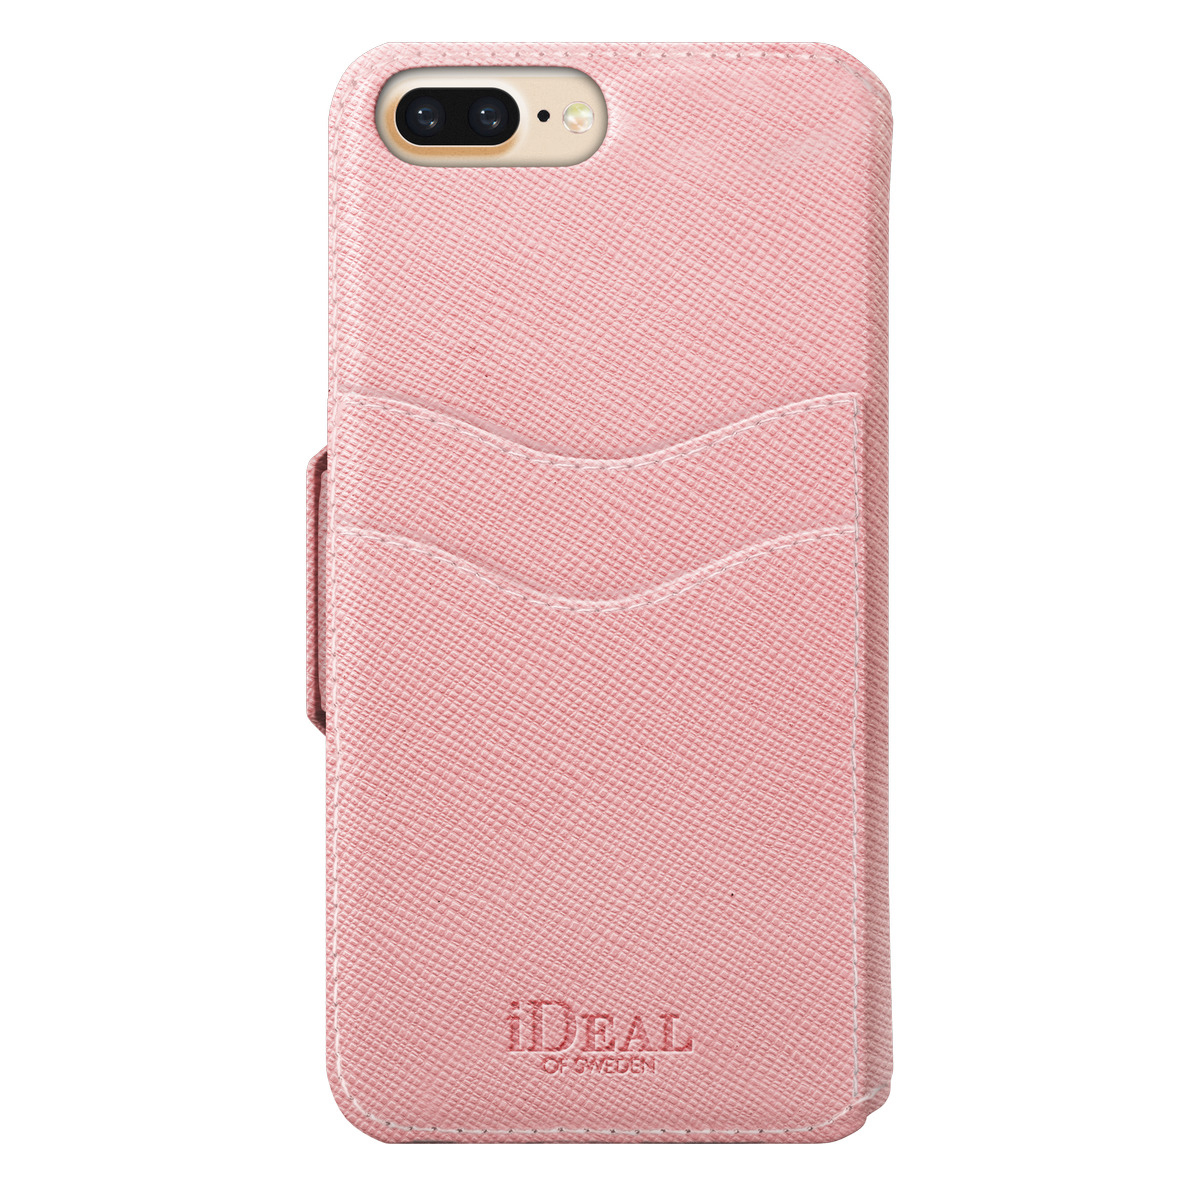 IDEAL OF Bookcover, 6, iPhone Apple, 8, iPhone Rosa SWEDEN 7, Fashion, iPhone